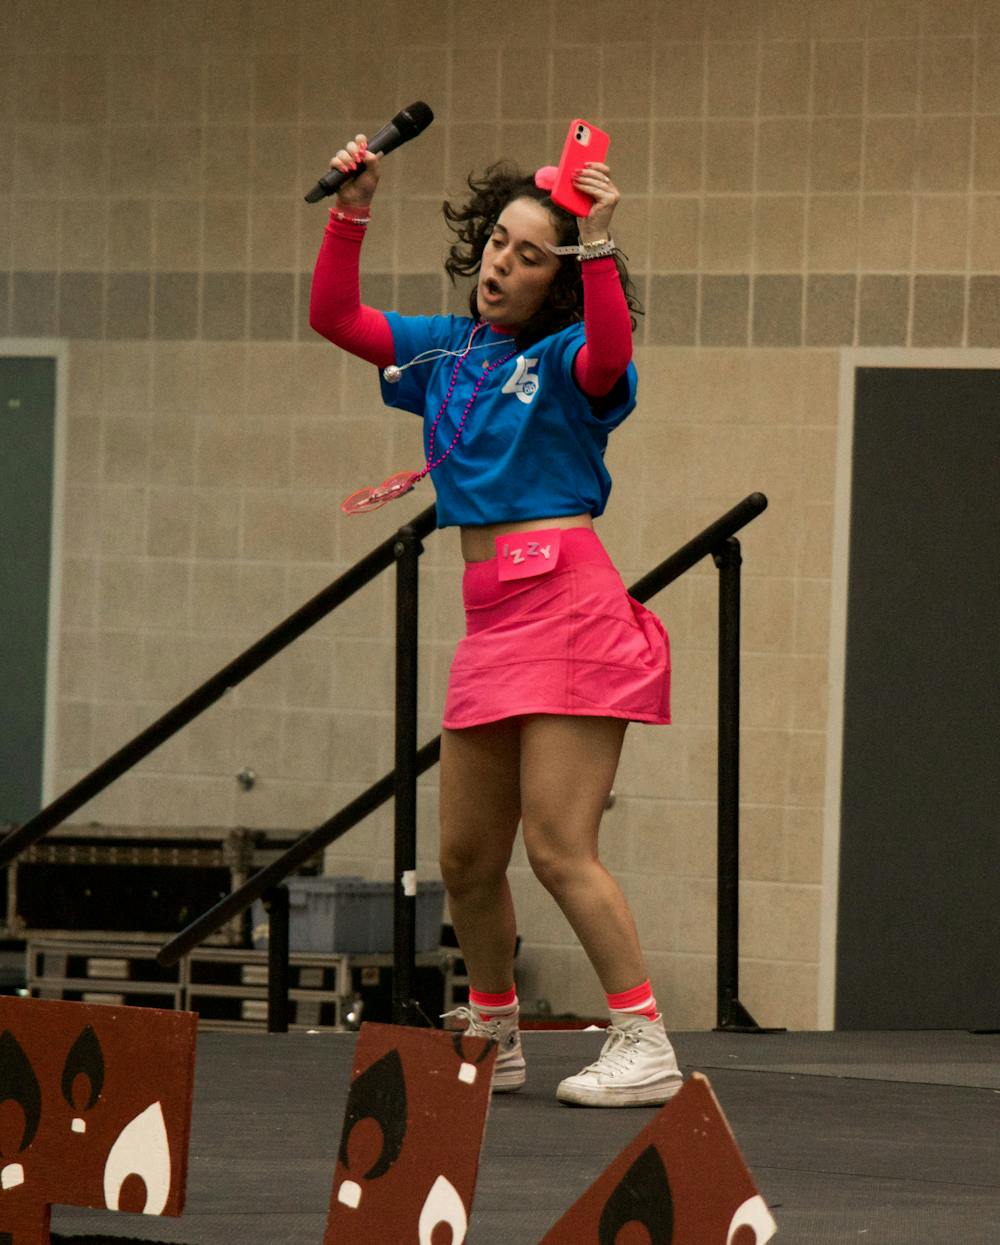 <p>Izzy Yoos pumps up the crowd before talking about how Dance Marathon helped her when she was young and struggling with health problems. Dance Marathon celebrated its 25th year raising money for the Prisma Health Children’s Hospital during their Main Event ceremony on March 25, 2023, in the Strom Thurmond Wellness and Fitness Center.&nbsp;</p>